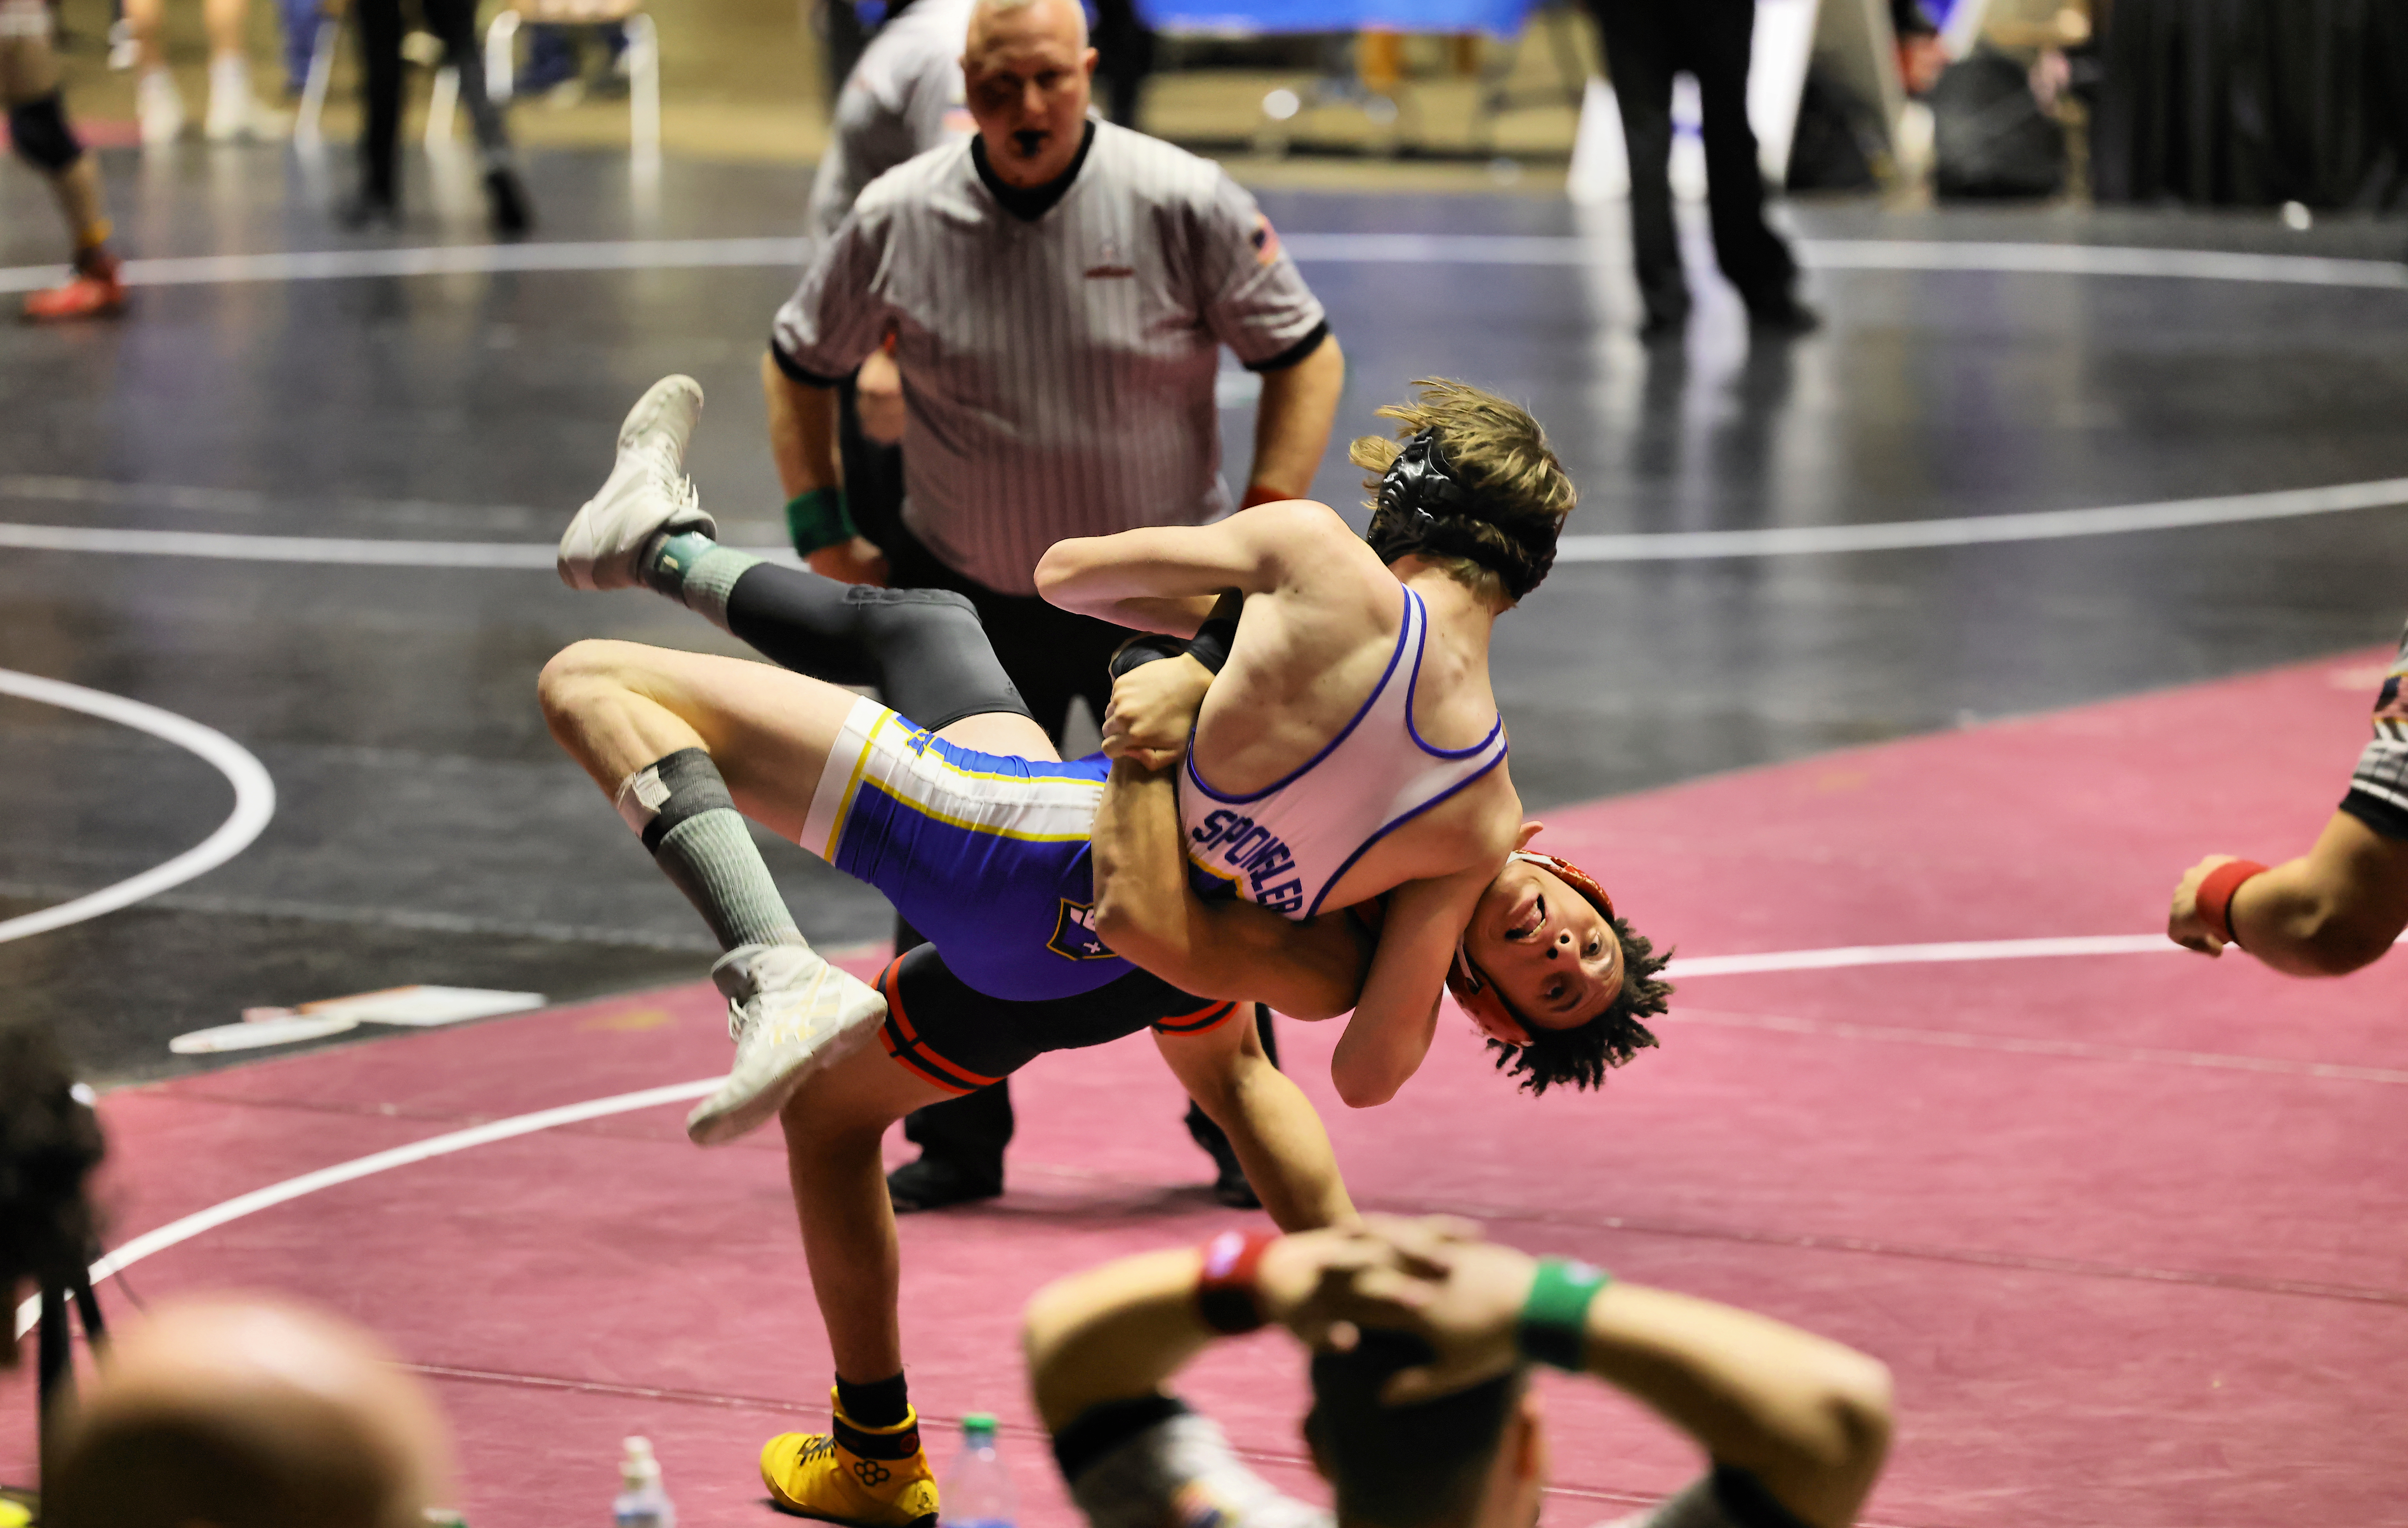 Weaver’s J.D. Johannson takes down Shawn Sponsler of Montgomery Catholic on the way to his pin at 160. (Photo by Jimmy Smith).